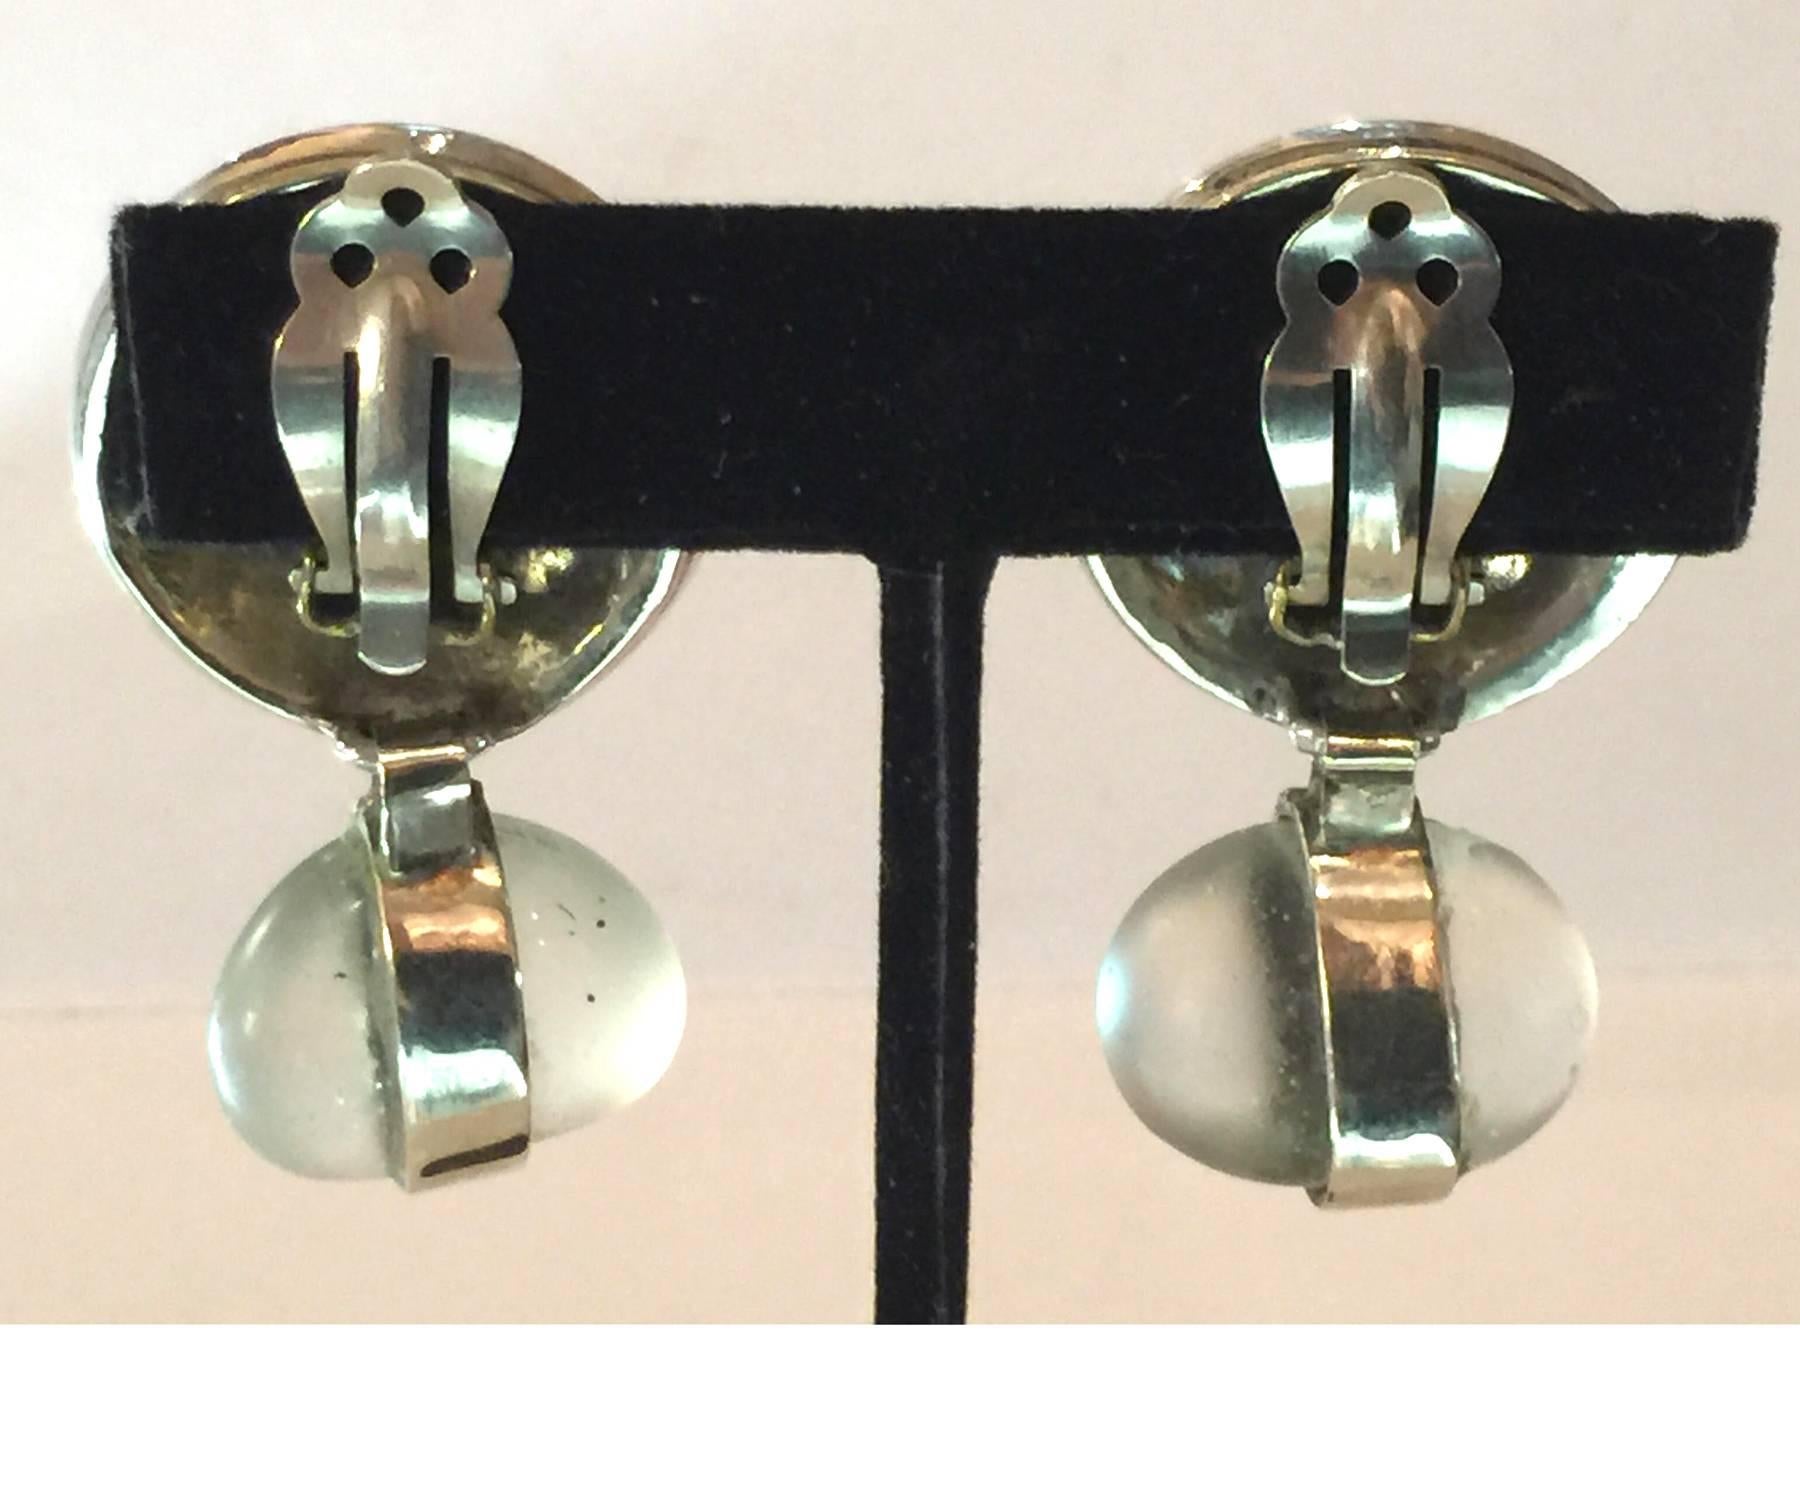 Glamorous, yet simple, these Perez Sanz earrings are of 21st c design and creation, and are from the well known Argentinian manufacture of contemporary glamorous jewels and gems. Silvertone discs with a central rhinestone focal stone suspend